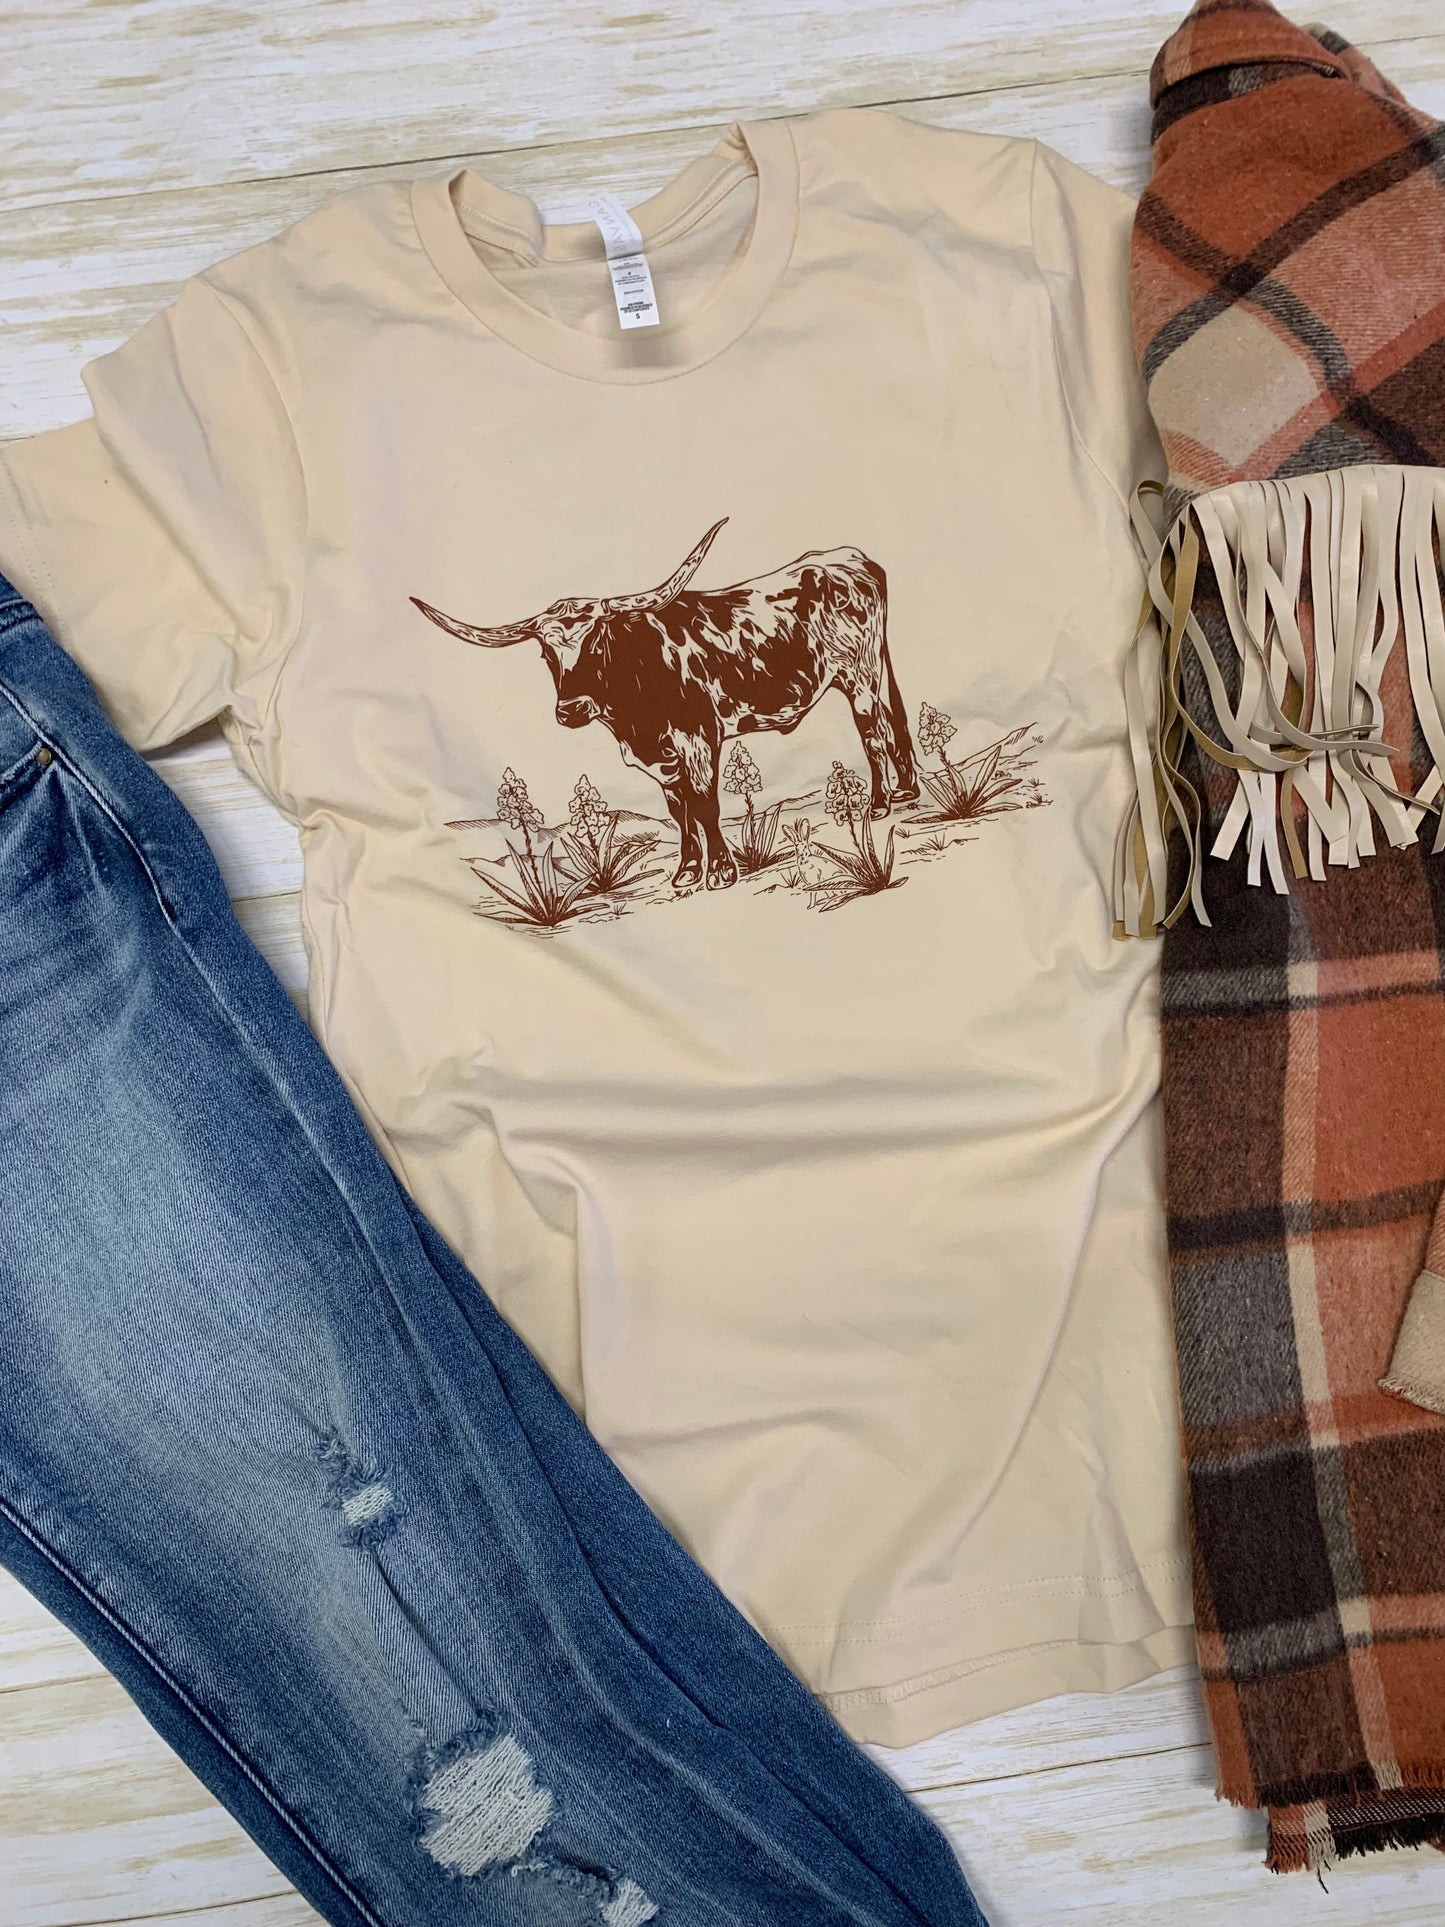 Longhorn and yucca graphic tee